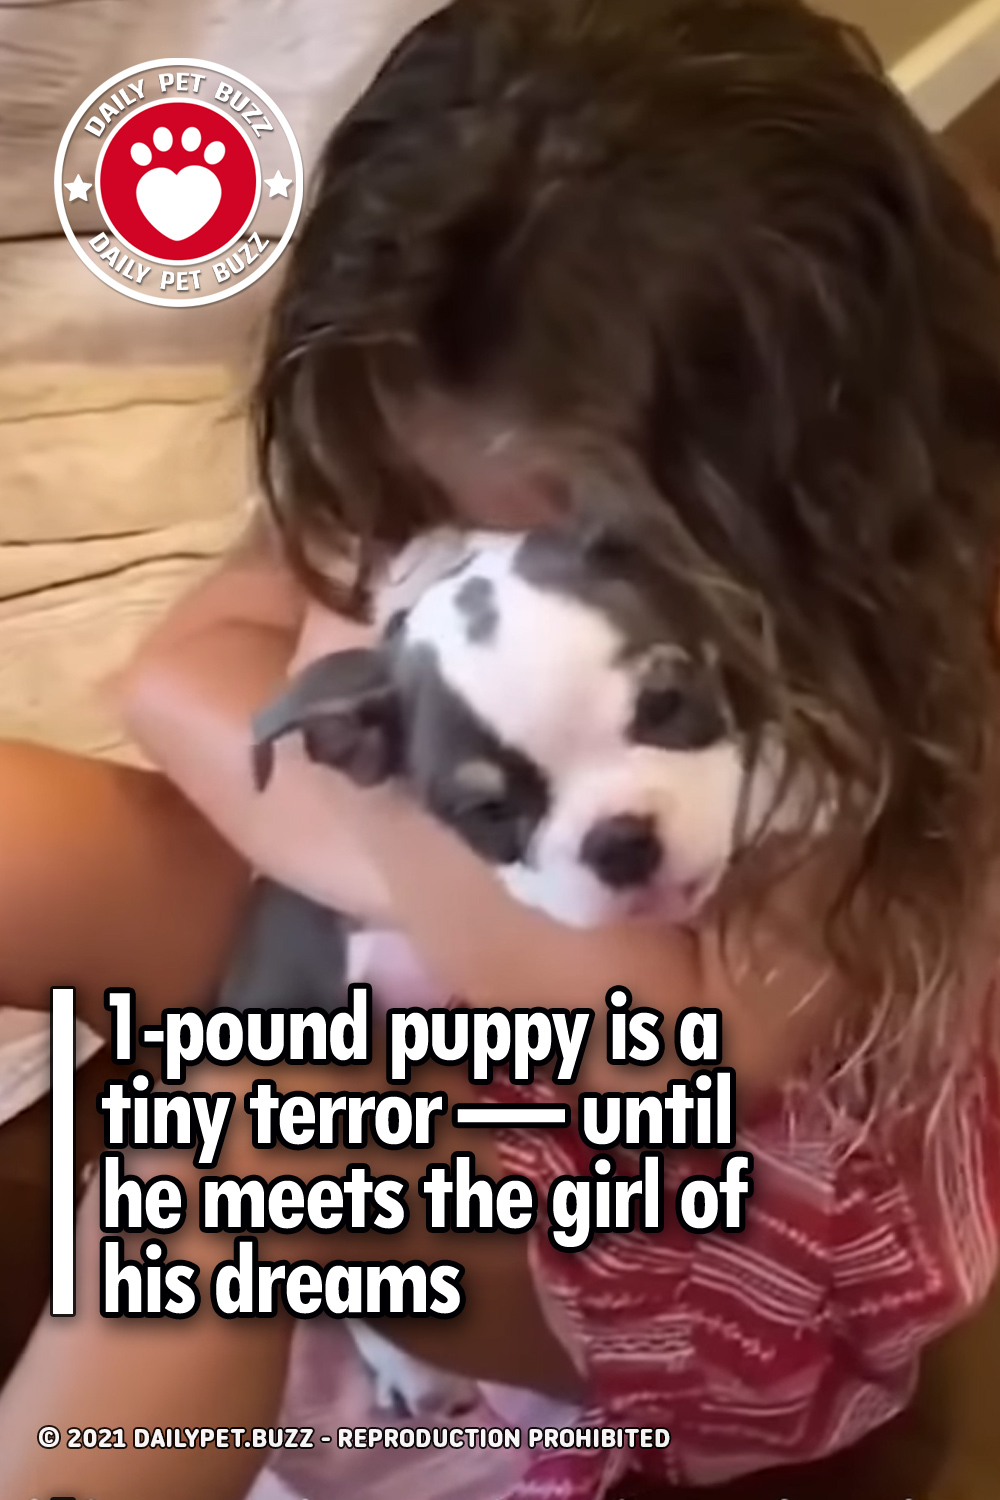 1-pound puppy is a tiny terror — until he meets the girl of his dreams